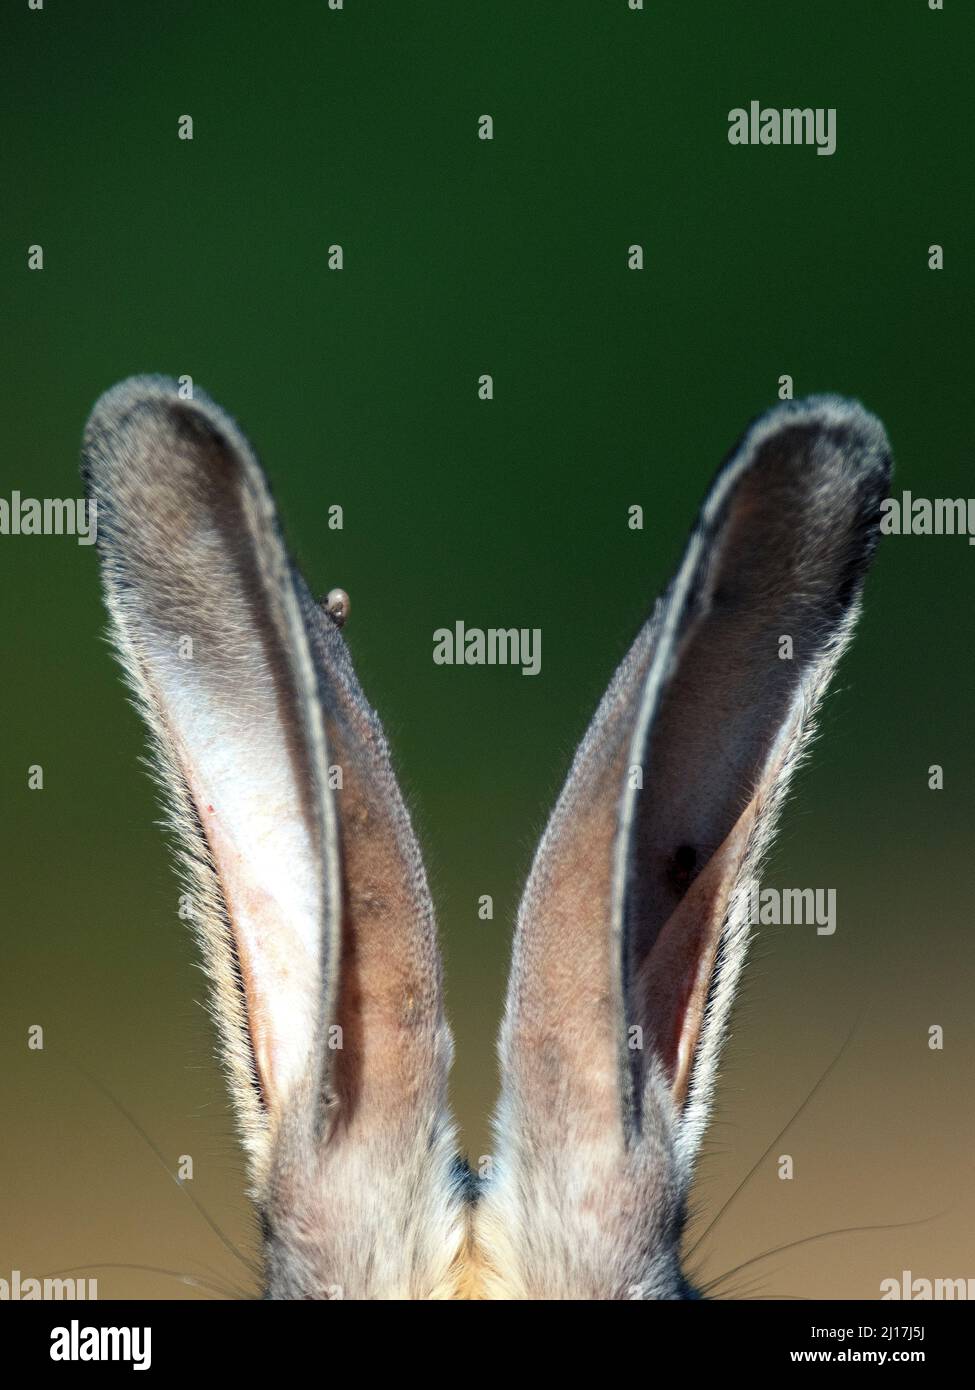 Close-up of two raised animal ears Stock Photo